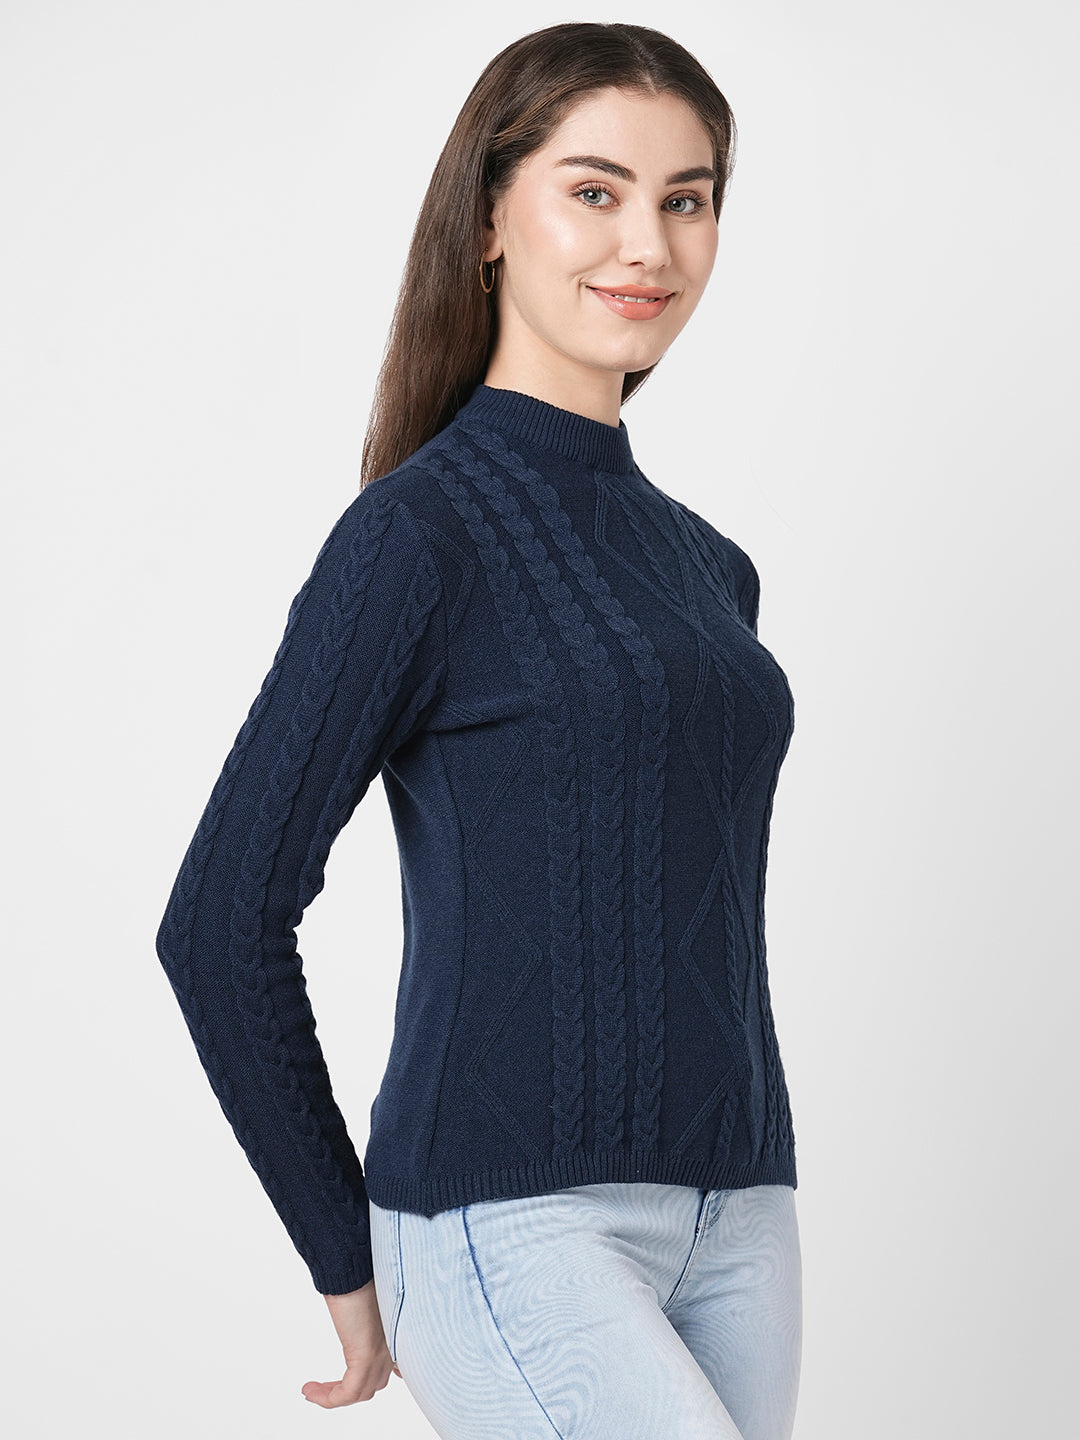 Women Solid Casual Slim Fit Sweater